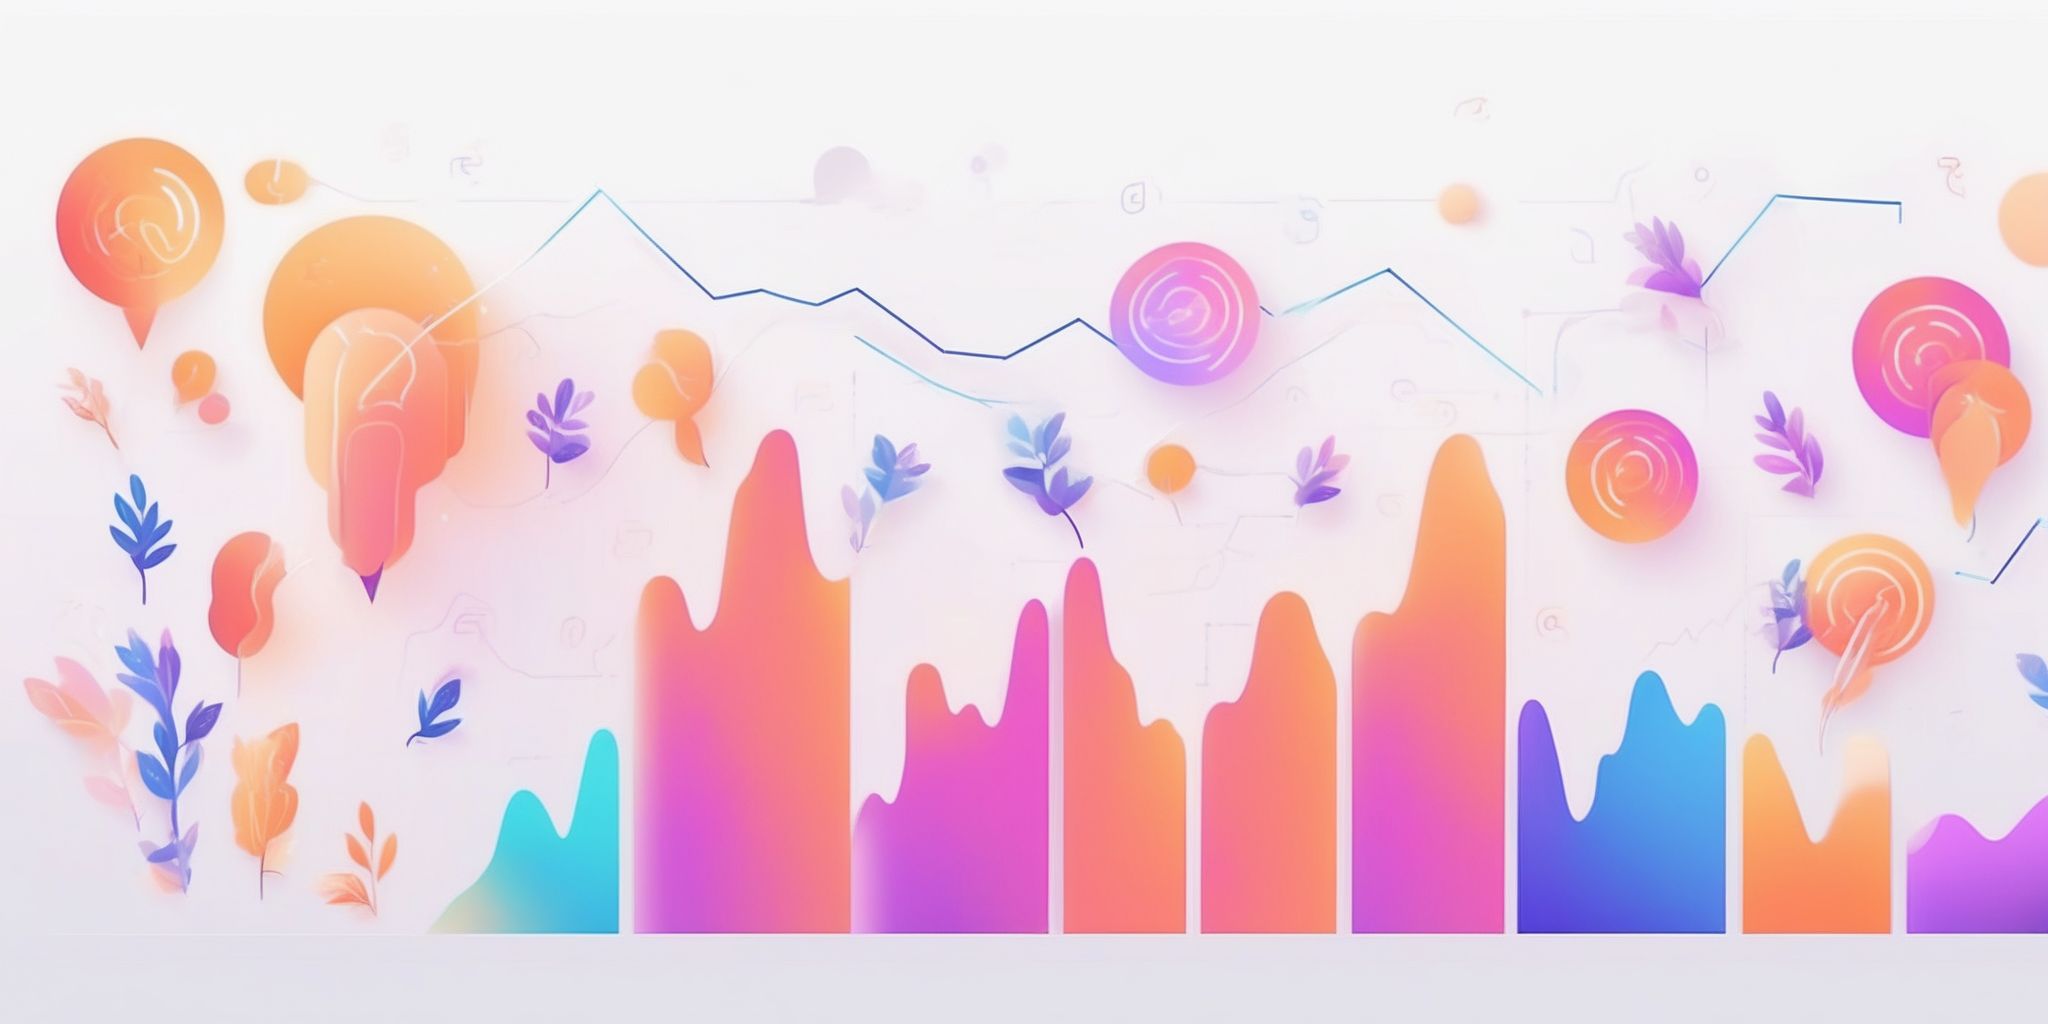 brand growth in illustration style with gradients and white background